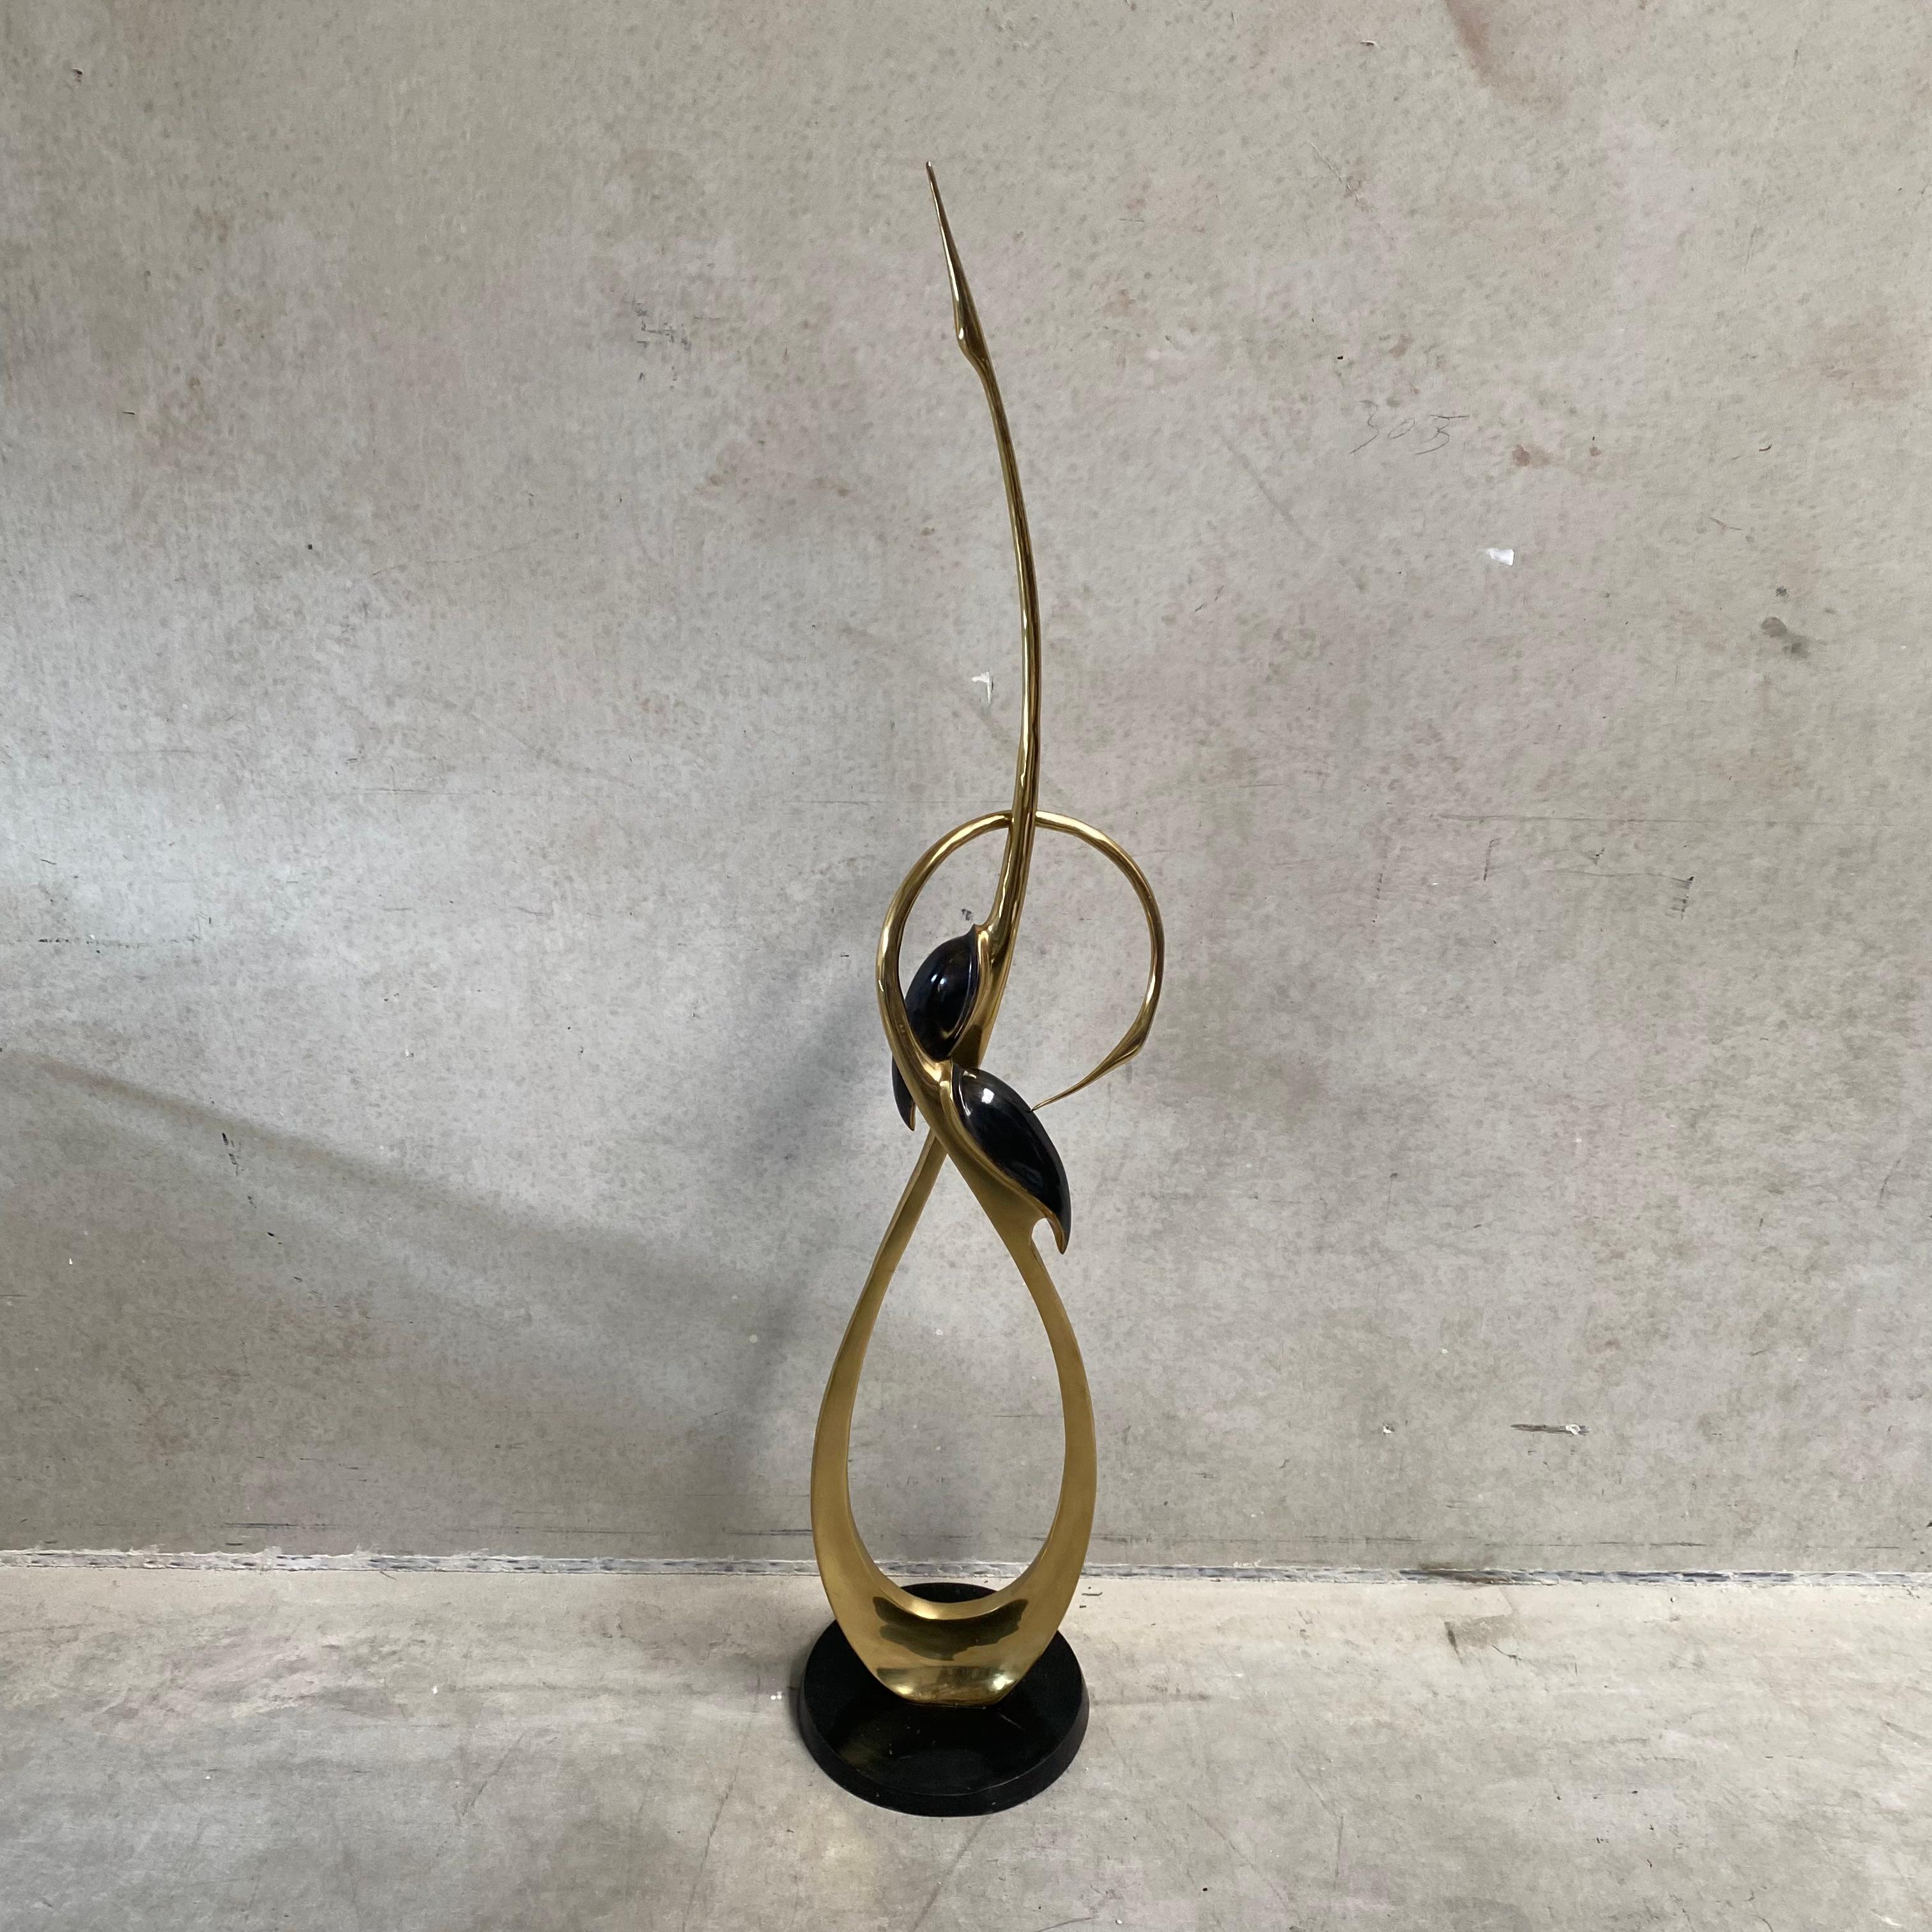 Tall Brass Entwined Cranes Sculpture by Boris Lovet Lorski For Sale 3